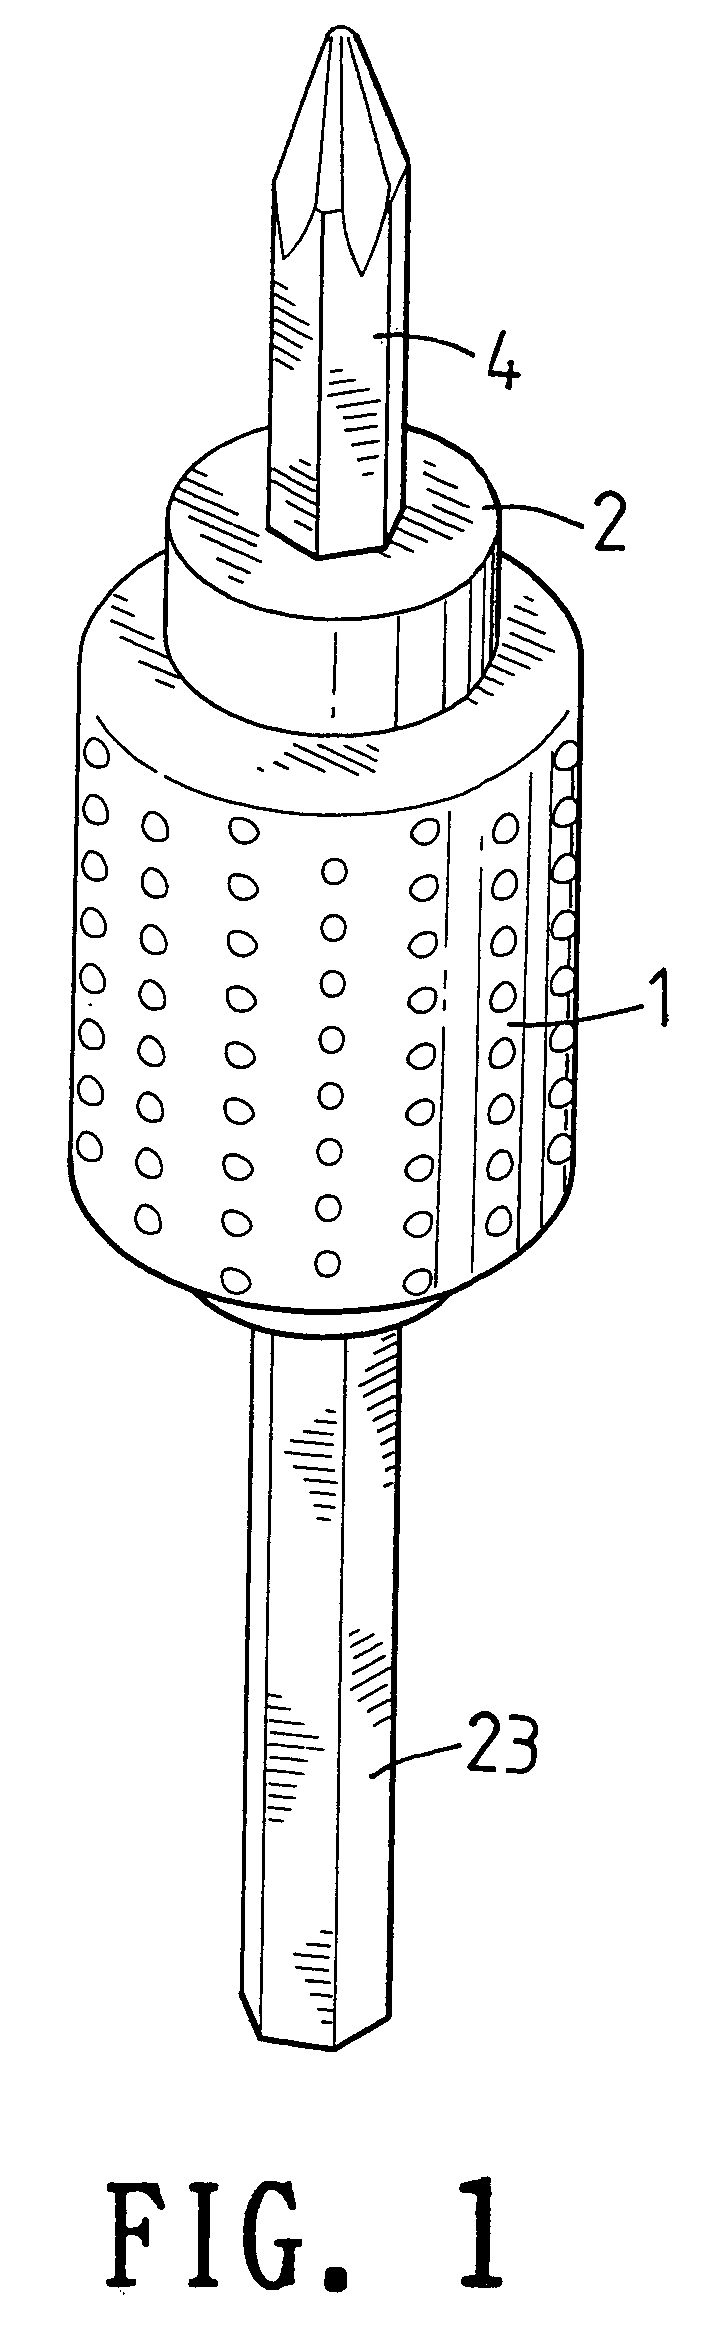 Socket assembly that can be mounted and detached quickly